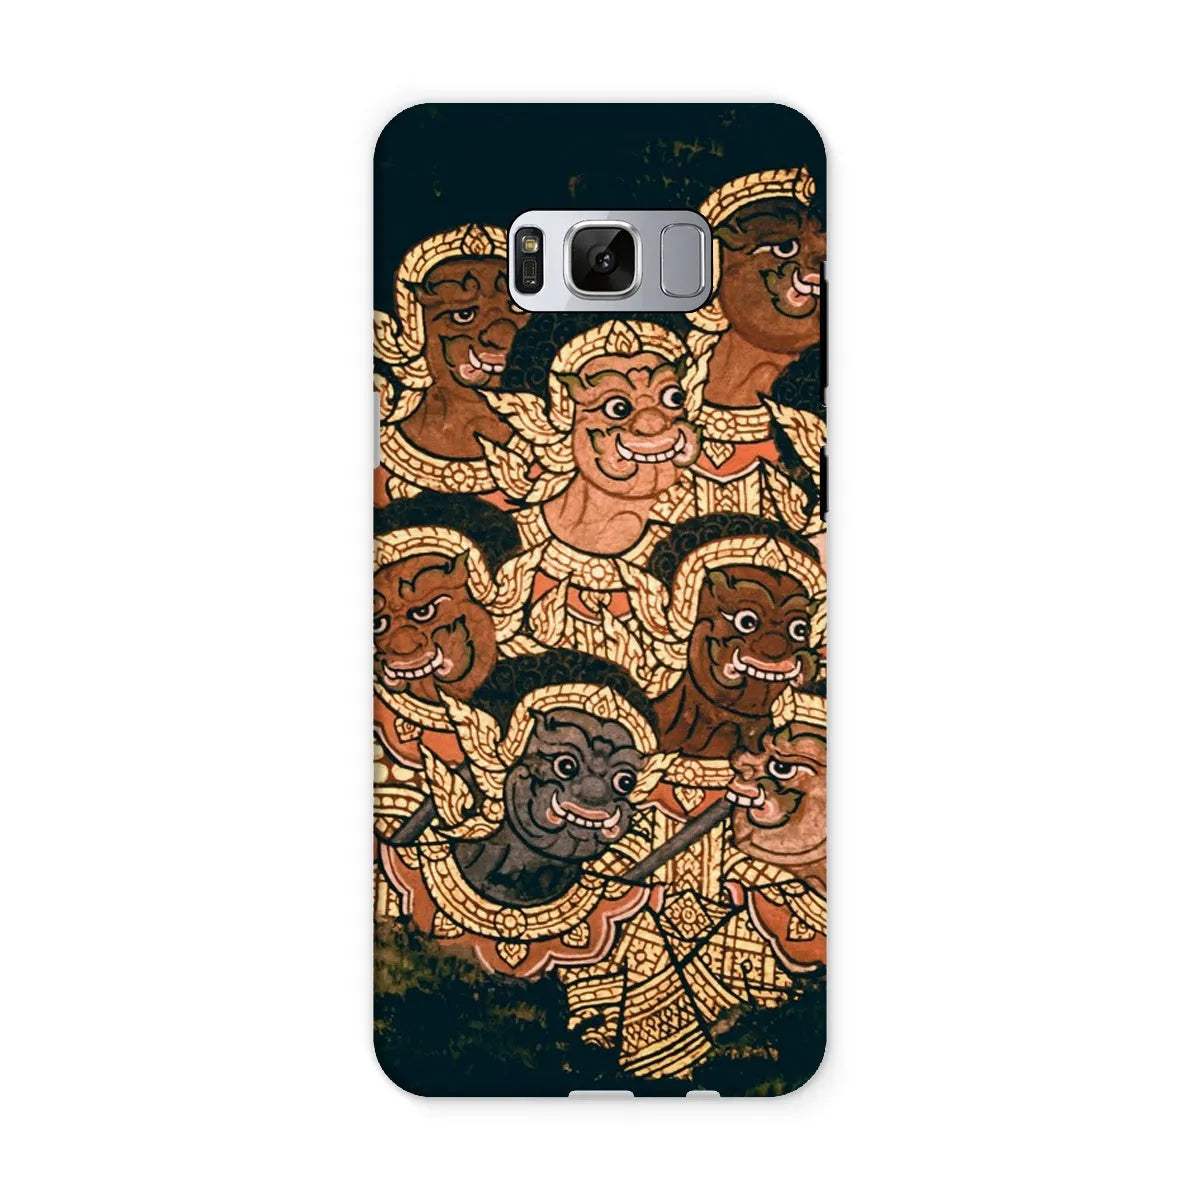 Babes In The Woods - Thailand Aesthetic Art Phone Case - Samsung Galaxy S8 / Matte - Mobile Phone Cases - Aesthetic Art